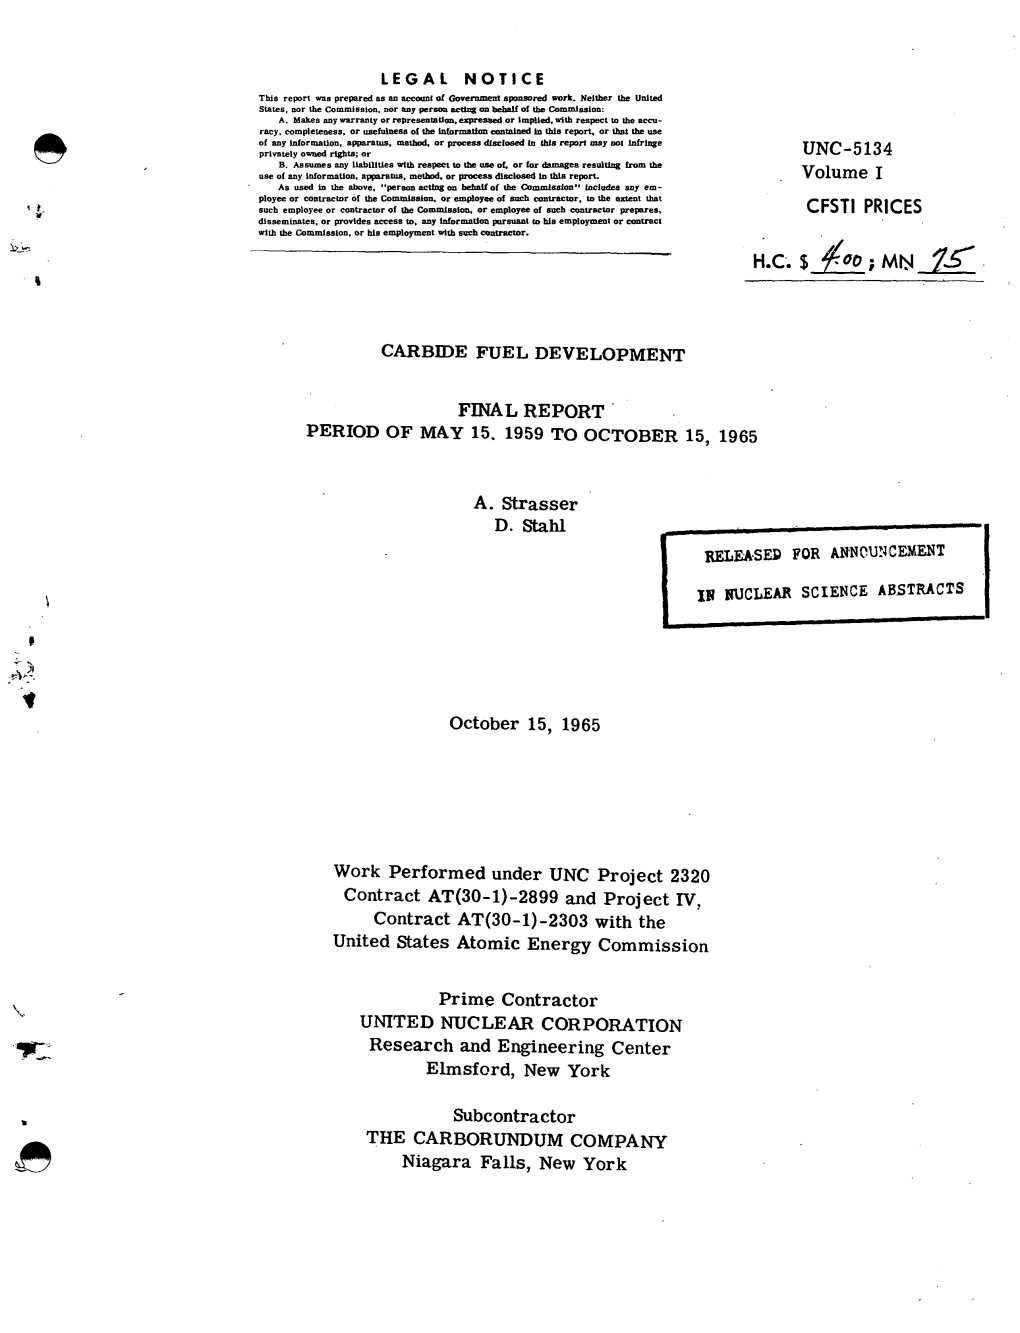 Carbide Fuel Development Final Report Period of May 15, 1959 To